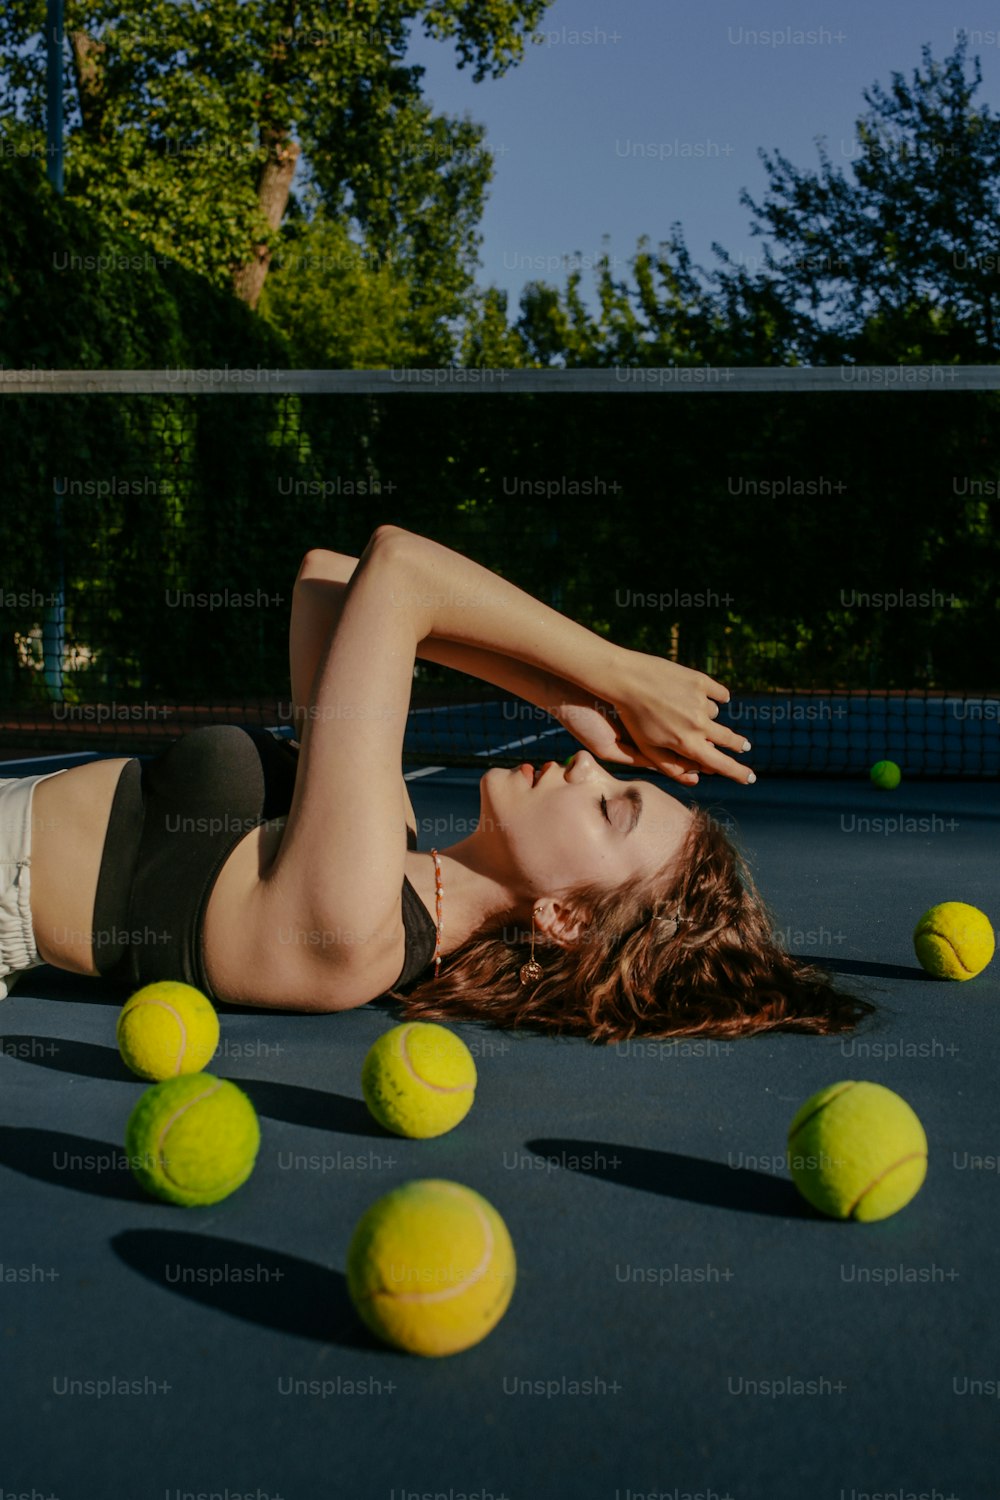 a woman laying on a tennis court surrounded by tennis balls